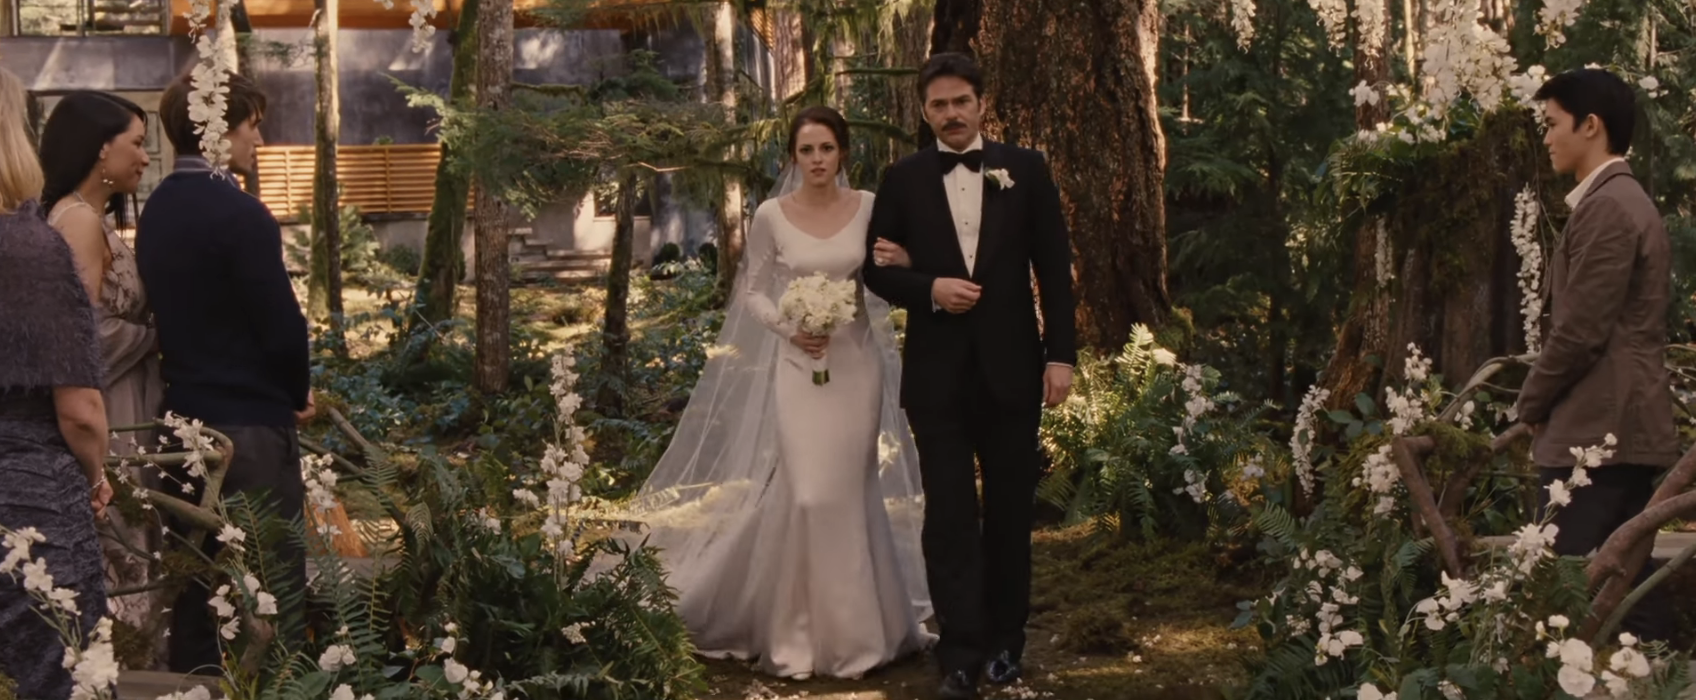 Bella Swan in a wedding dress walks down the aisle with Charlie Swan in a scene from Twilight